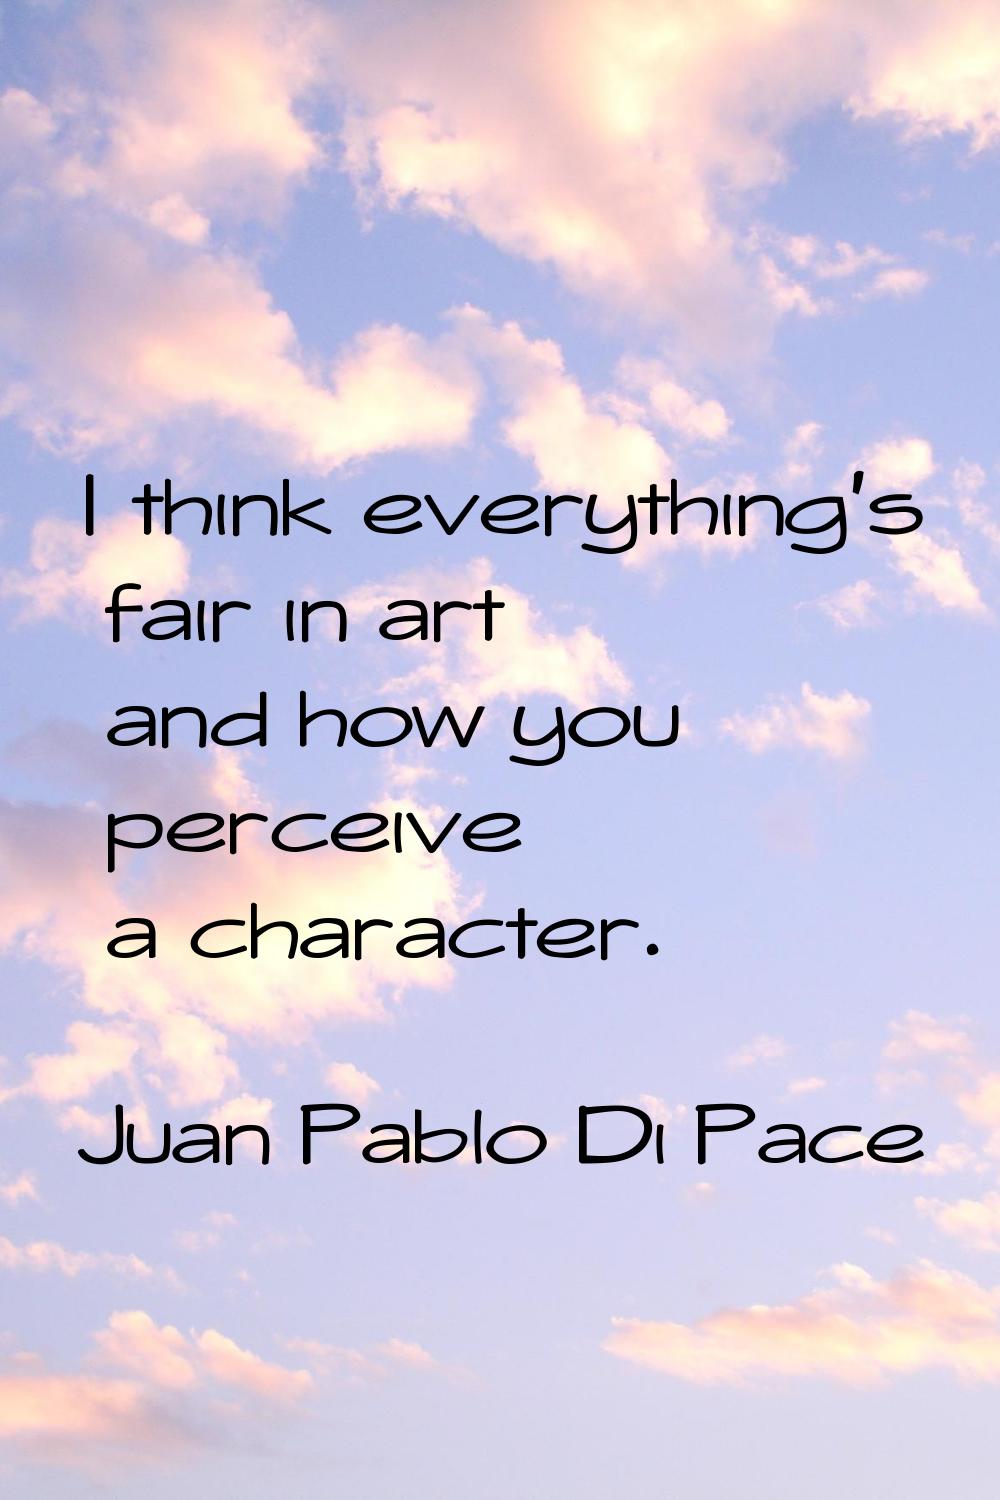 I think everything's fair in art and how you perceive a character.